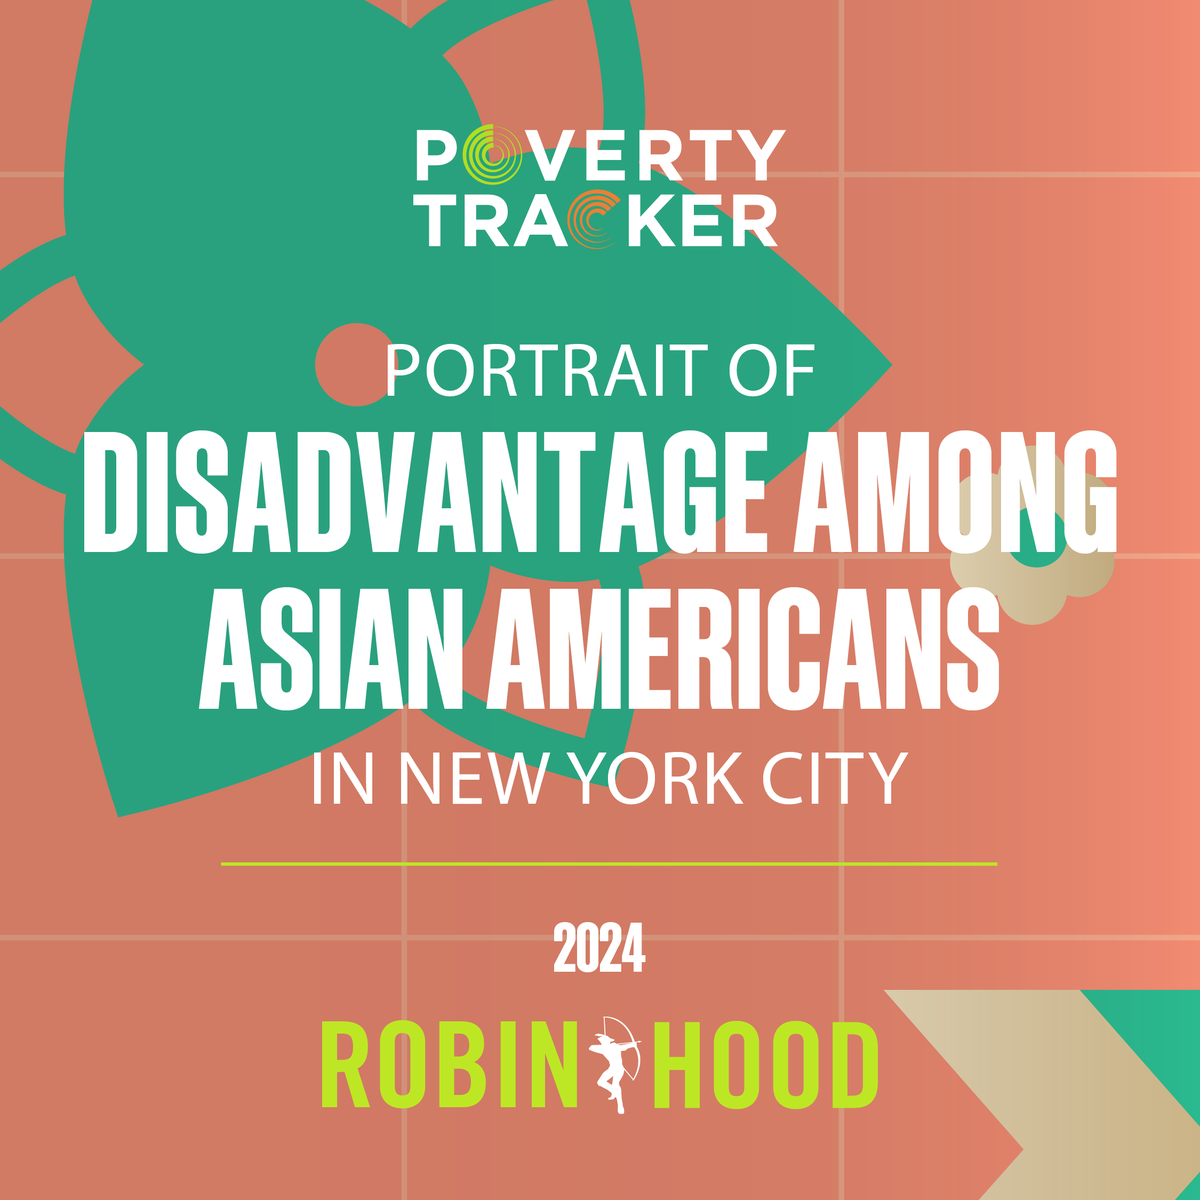 The latest Poverty Tracker from @RobinHoodNYC @CpspPoverty reveals insights about the economic well-being of Asian Americans in NYC, including nearly 1-in-4 Asian New Yorkers living in poverty, almost 2x the rate of white New Yorkers. 🔗 Read more: robinhood.org/reports/povert…